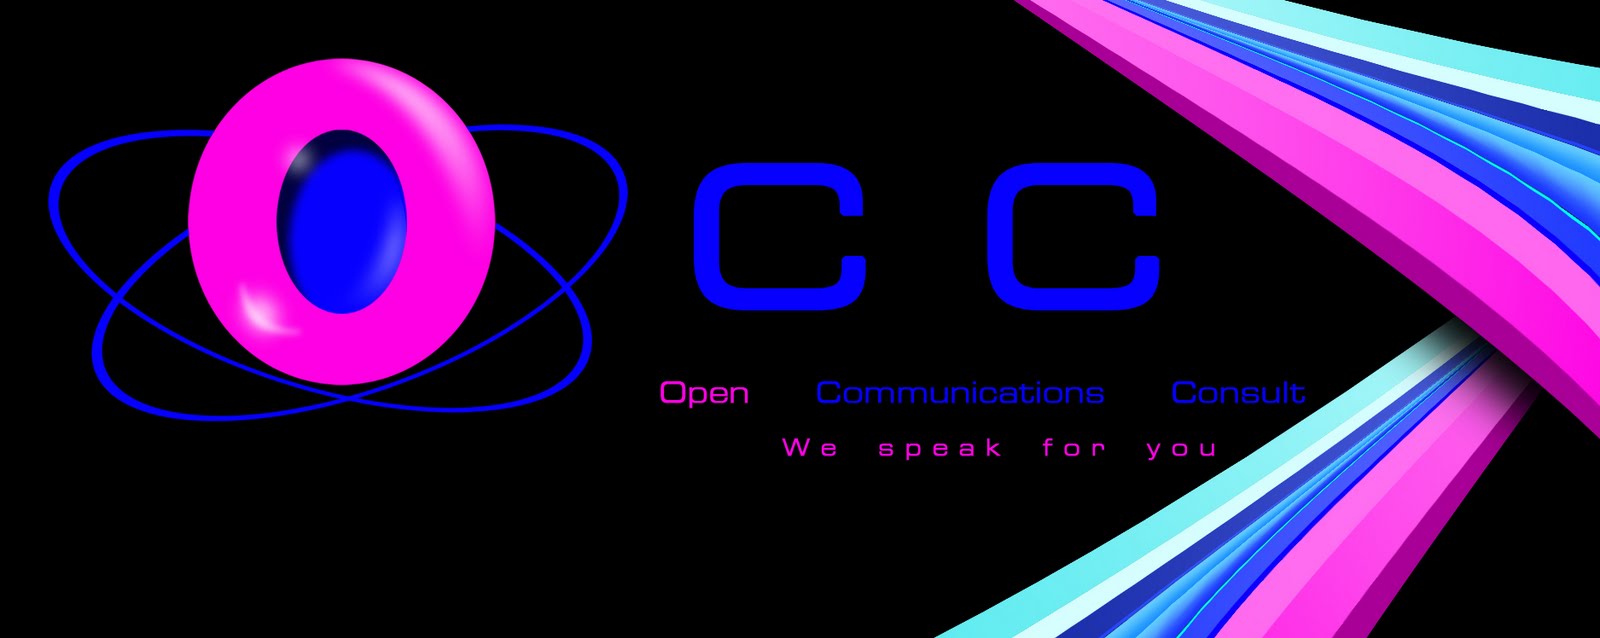 Open Communications Consult